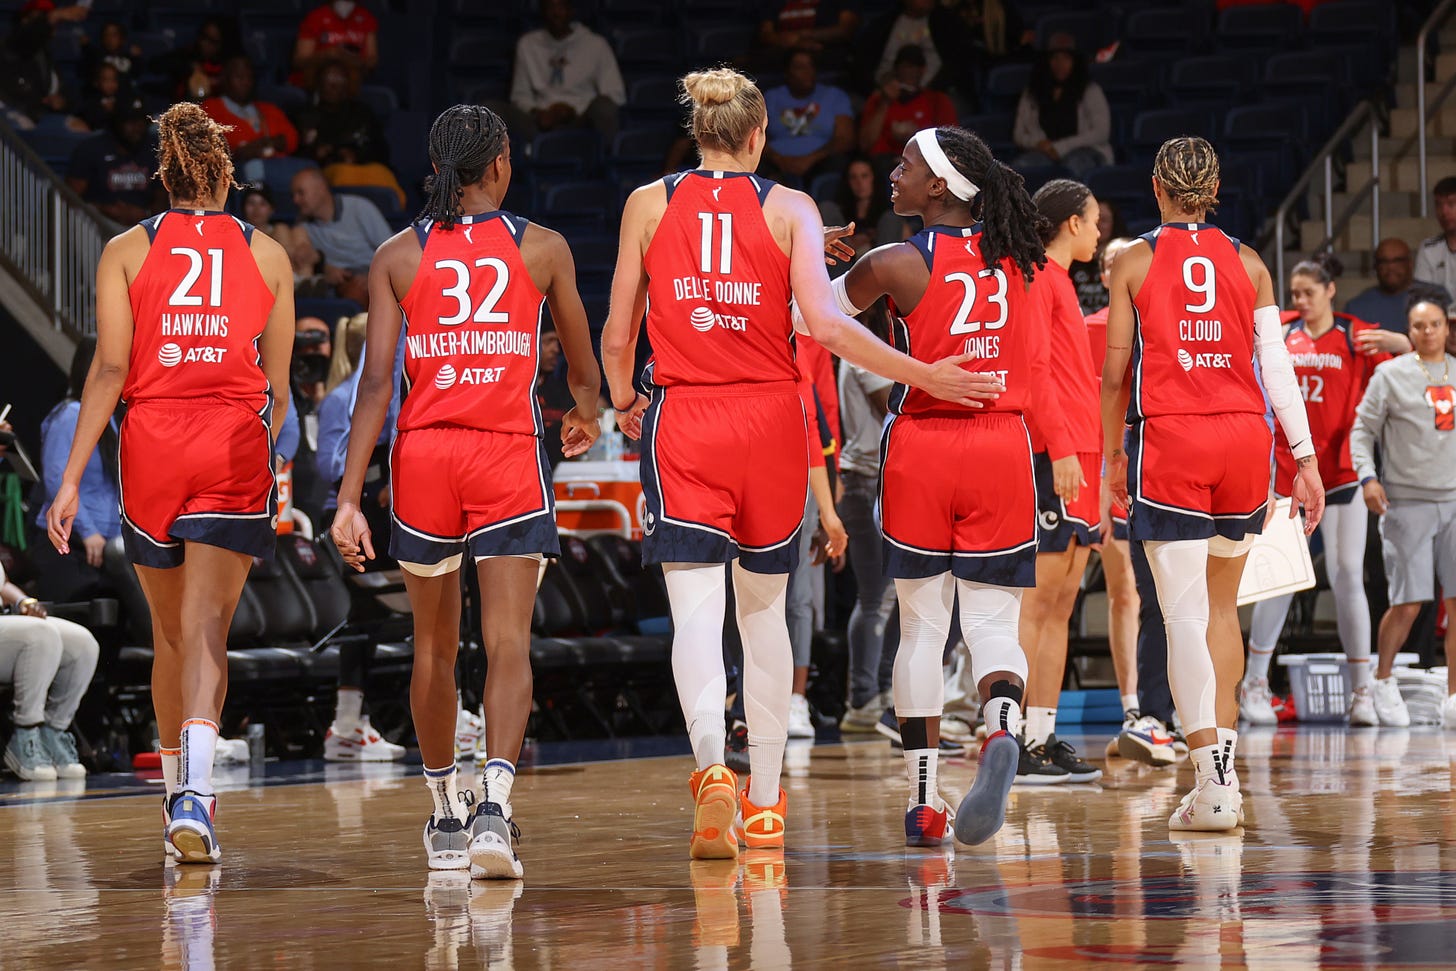 WASHINGTON,DC - MAY 10: A view of the Washington Mystics during the game during the preseason game on May 10, 2023 at the Emtertainment & Sports Arena in Washington, D.C. NOTE TO USER: User expressly acknowledges and agrees that, by downloading and or using this photograph, User is consenting to the terms and conditions of the Getty Images License Agreement. Mandatory Copyright Notice: Copyright 2019 NBAE